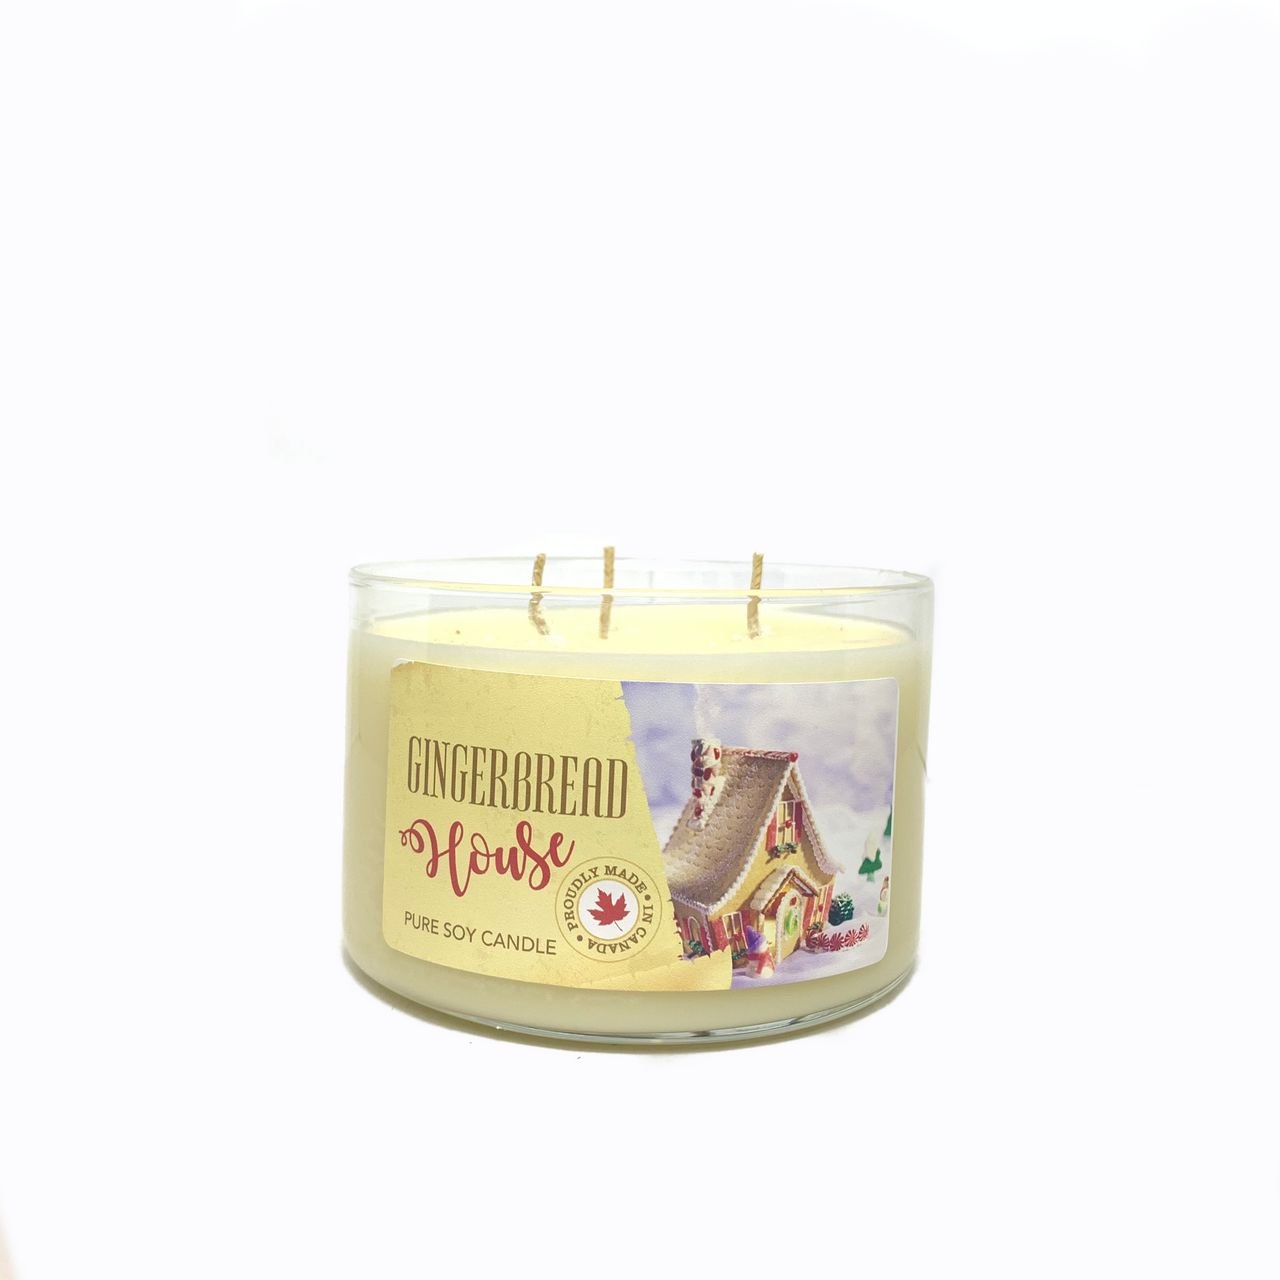 Gingerbread House - 3 wick